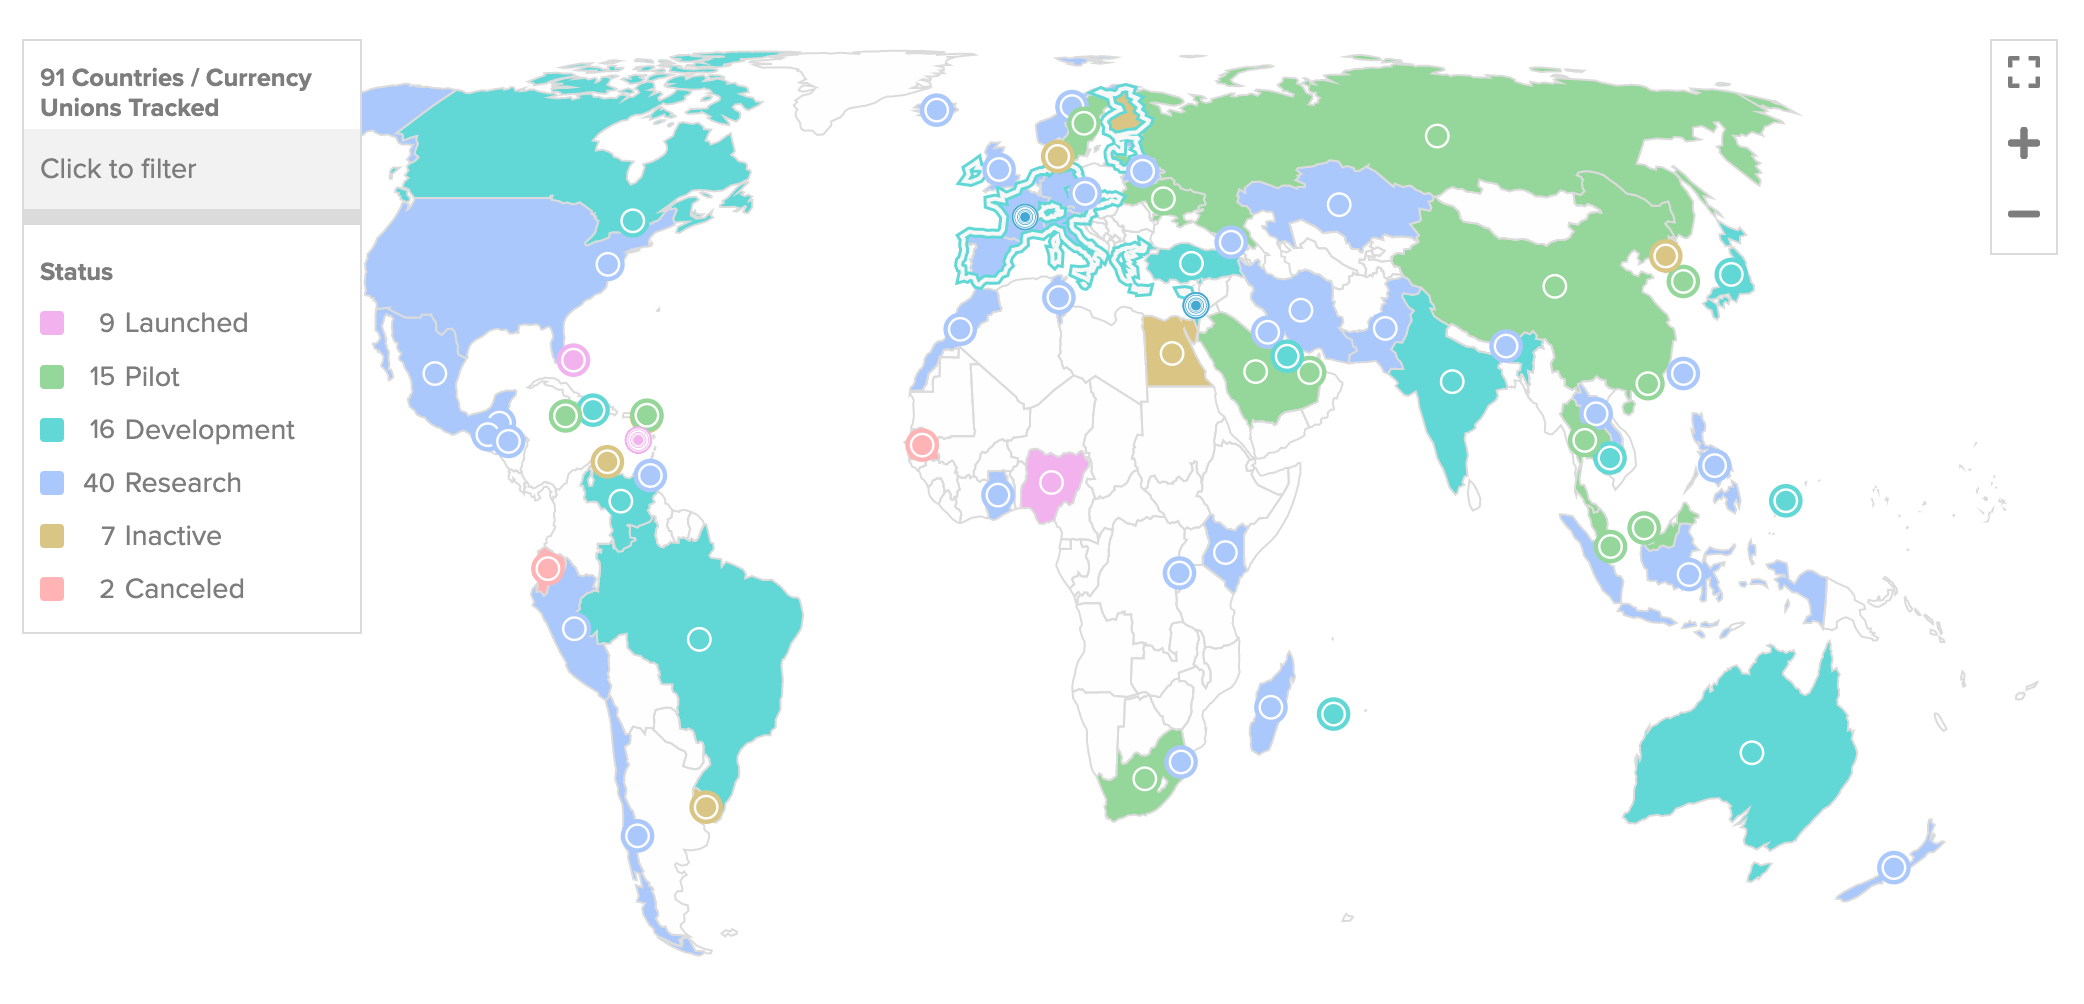 Development of CBDCs by Country Based on Color Codes